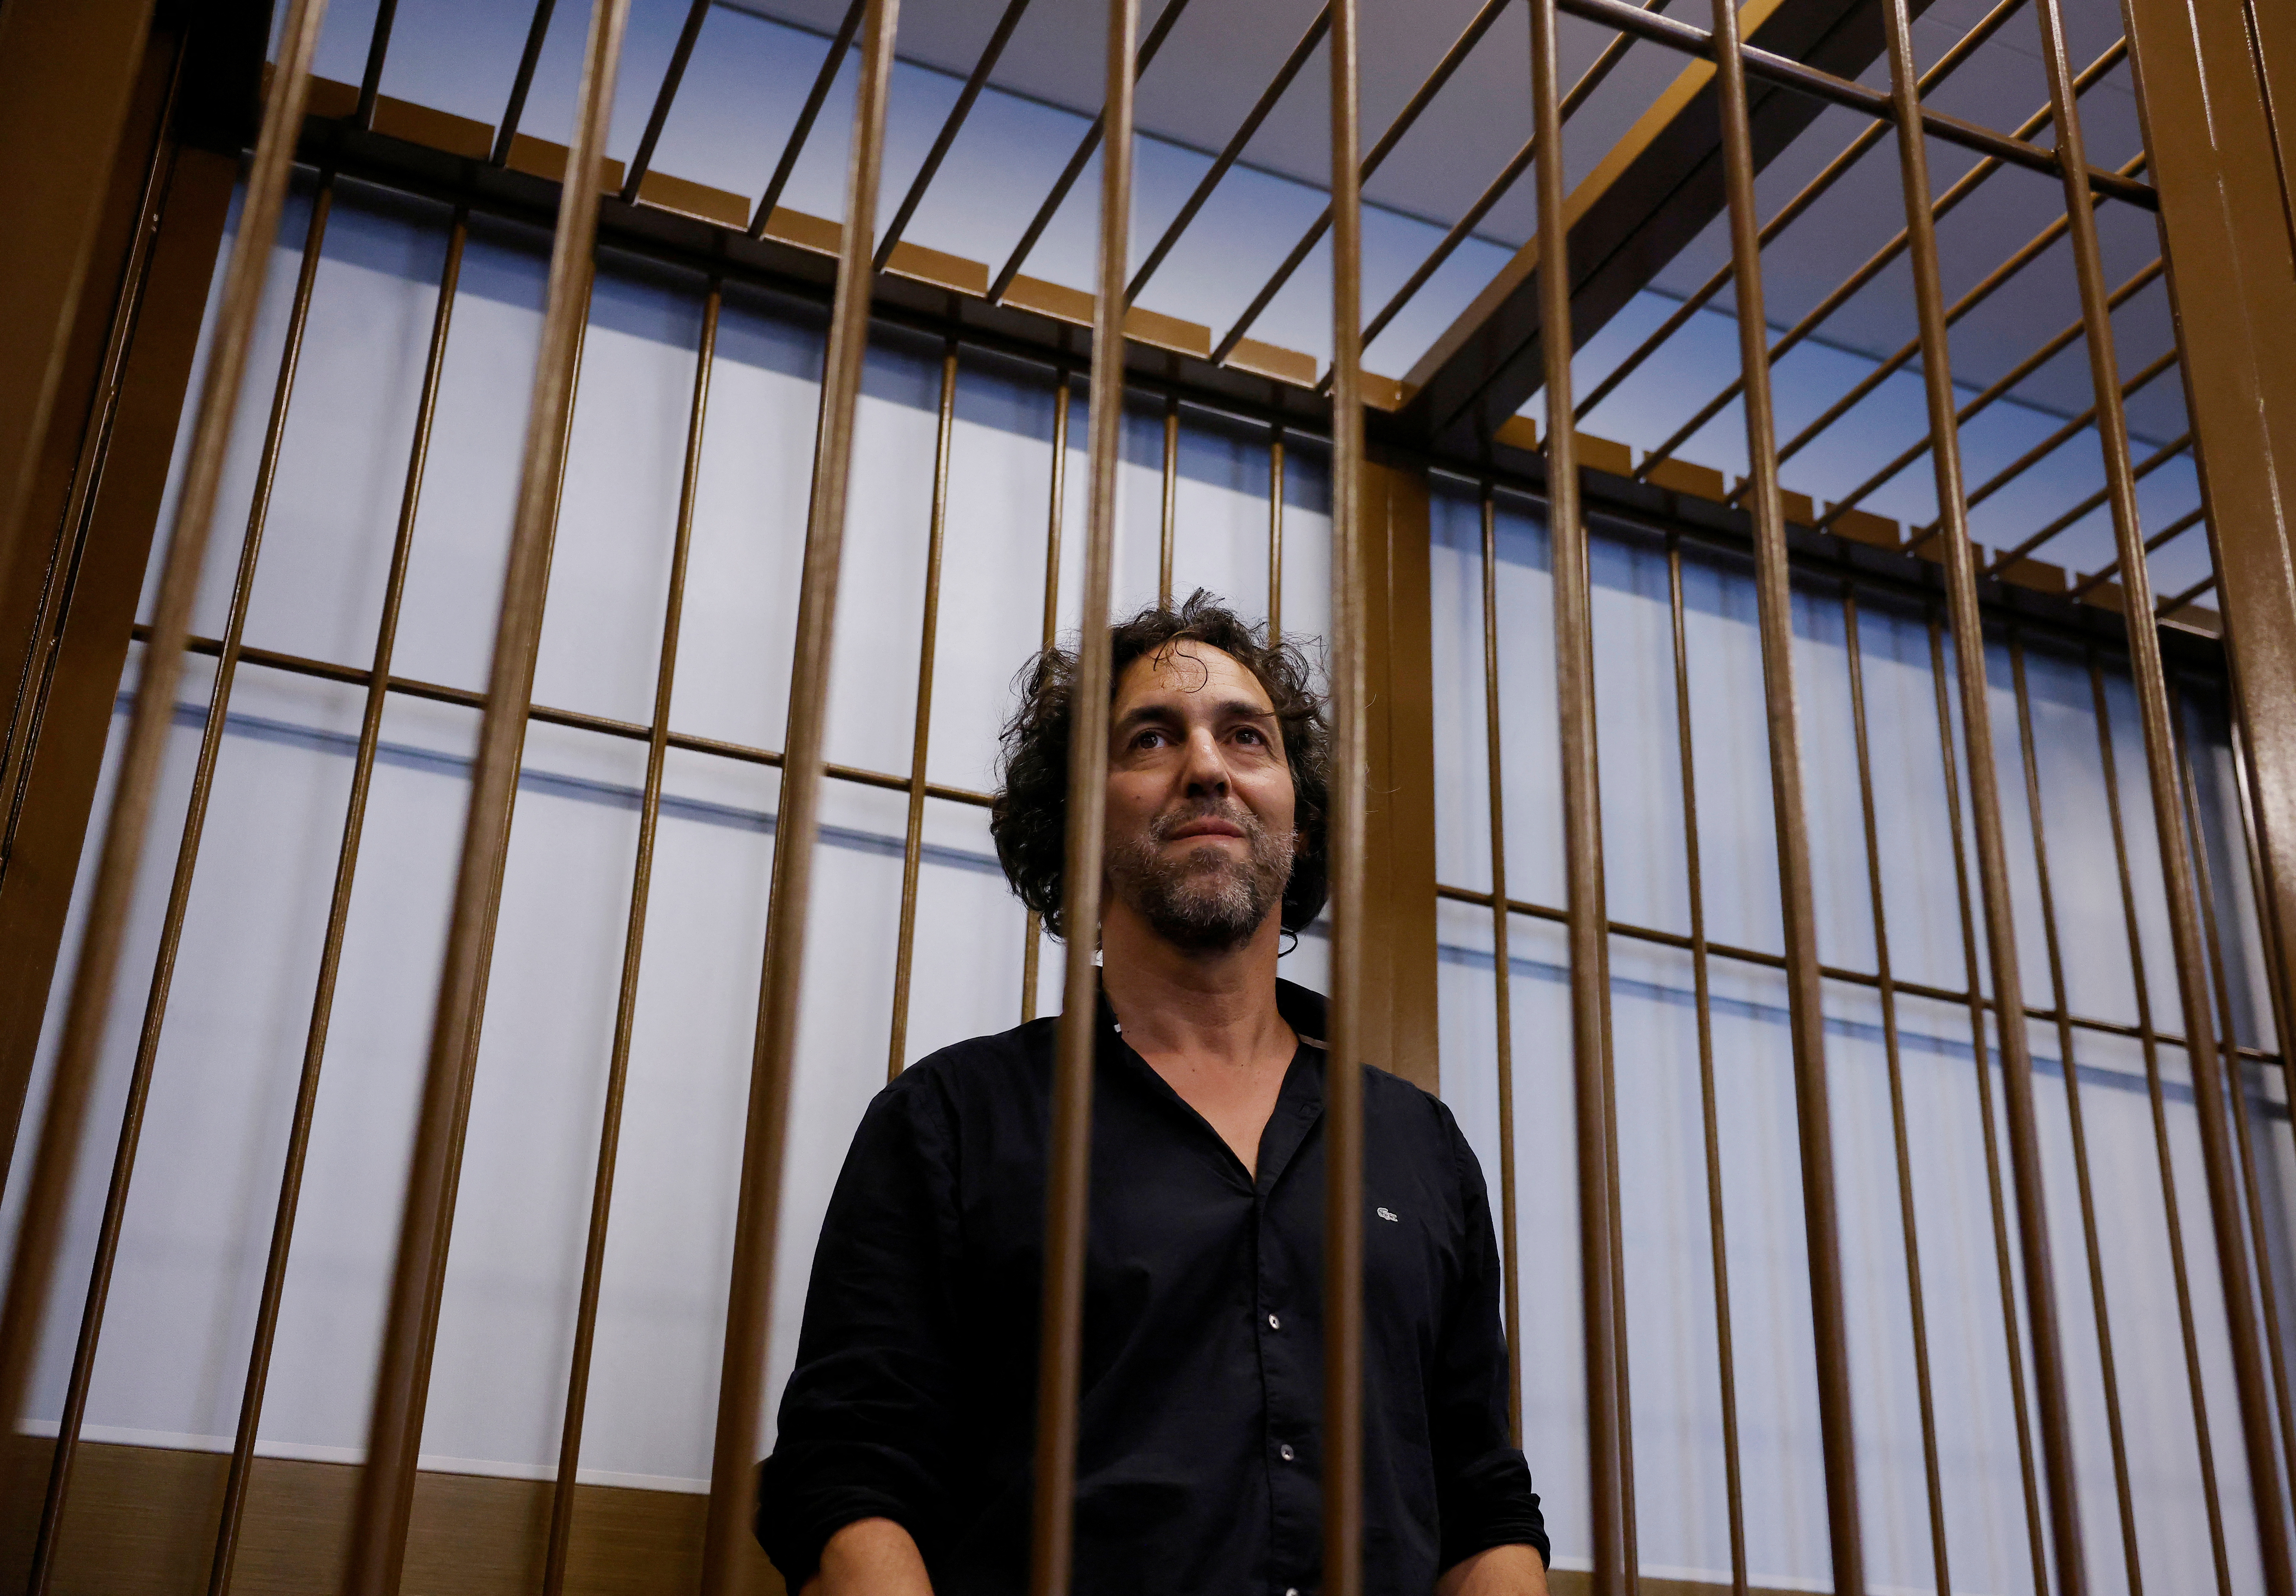 French national Laurent Vinatier attends a court hearing in Moscow